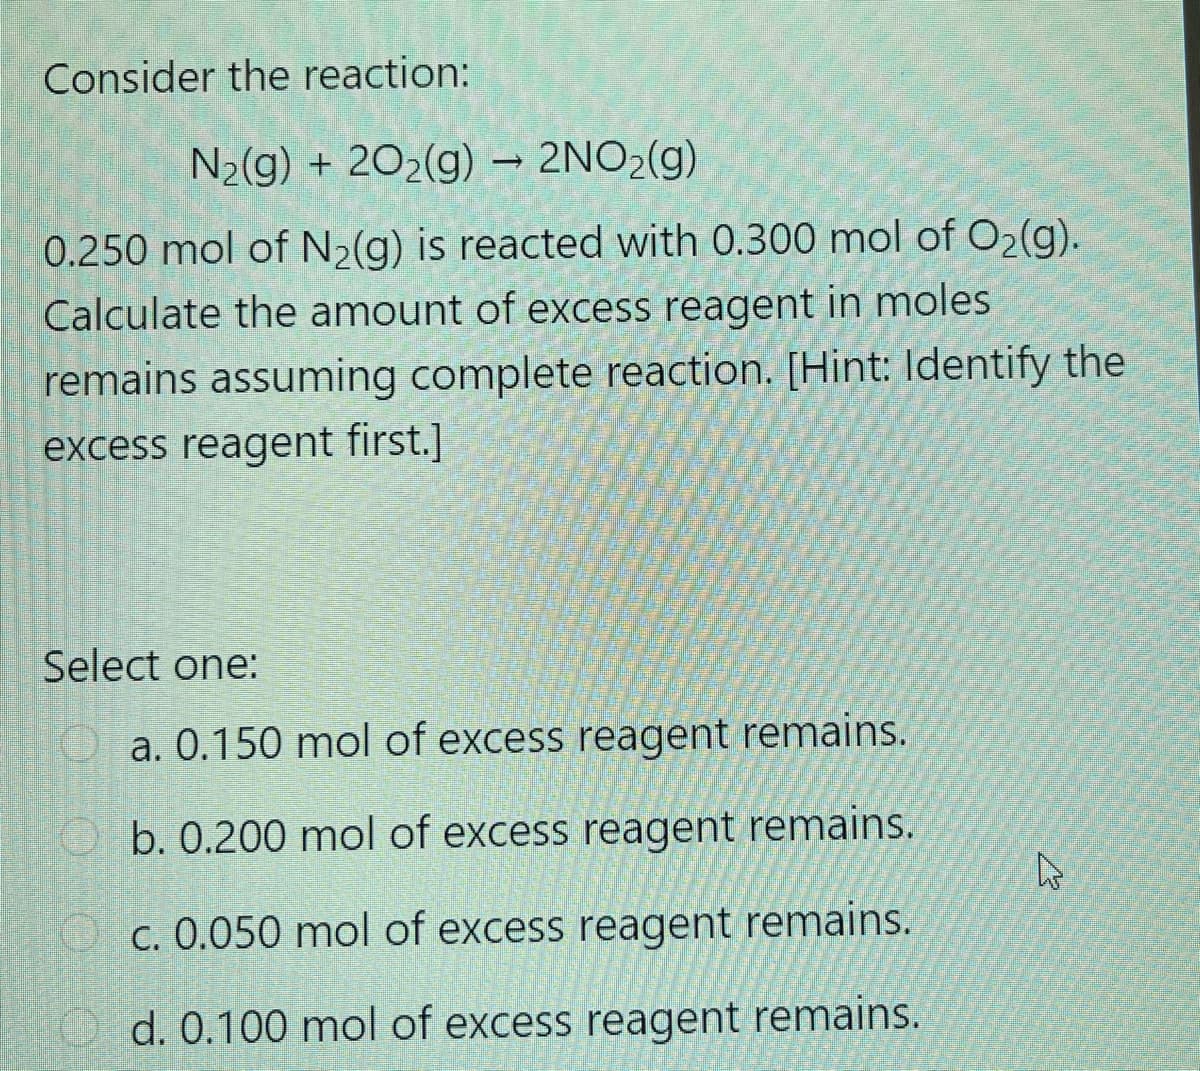 Consider the reaction:
N2(g) + 202(g) → 2NO2(g)
0.250 mol of N2(g) is reacted with 0.300 mol of O2(g).
Calculate the amount of excess reagent in moles
remains assuming complete reaction. [Hint: lIdentify the
excess reagent first.]
Select one:
a. 0.150 mol of excess reagent remains.
b. 0.200 mol of excess reagent remains.
C. 0.050 mol of excess reagent remains.
d. 0.100 mol of excess reagent remains.
